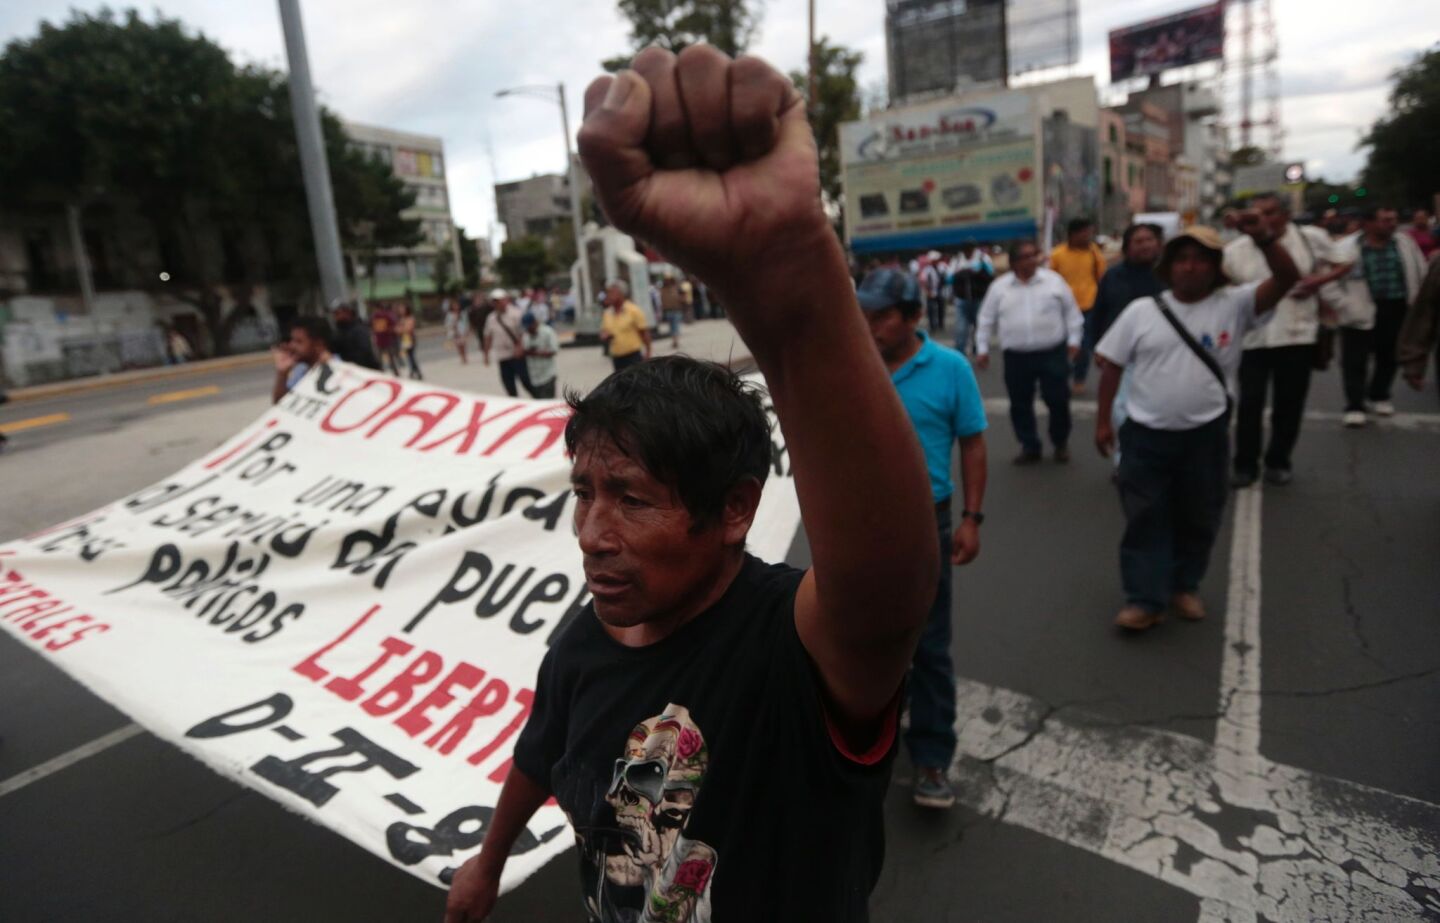 Striking teachers in the southern Mexican state of Oaxaca demonstrate against education reform plans and to demand the release of two of their leaders. Six people were killed during clashes and dozens were injured.